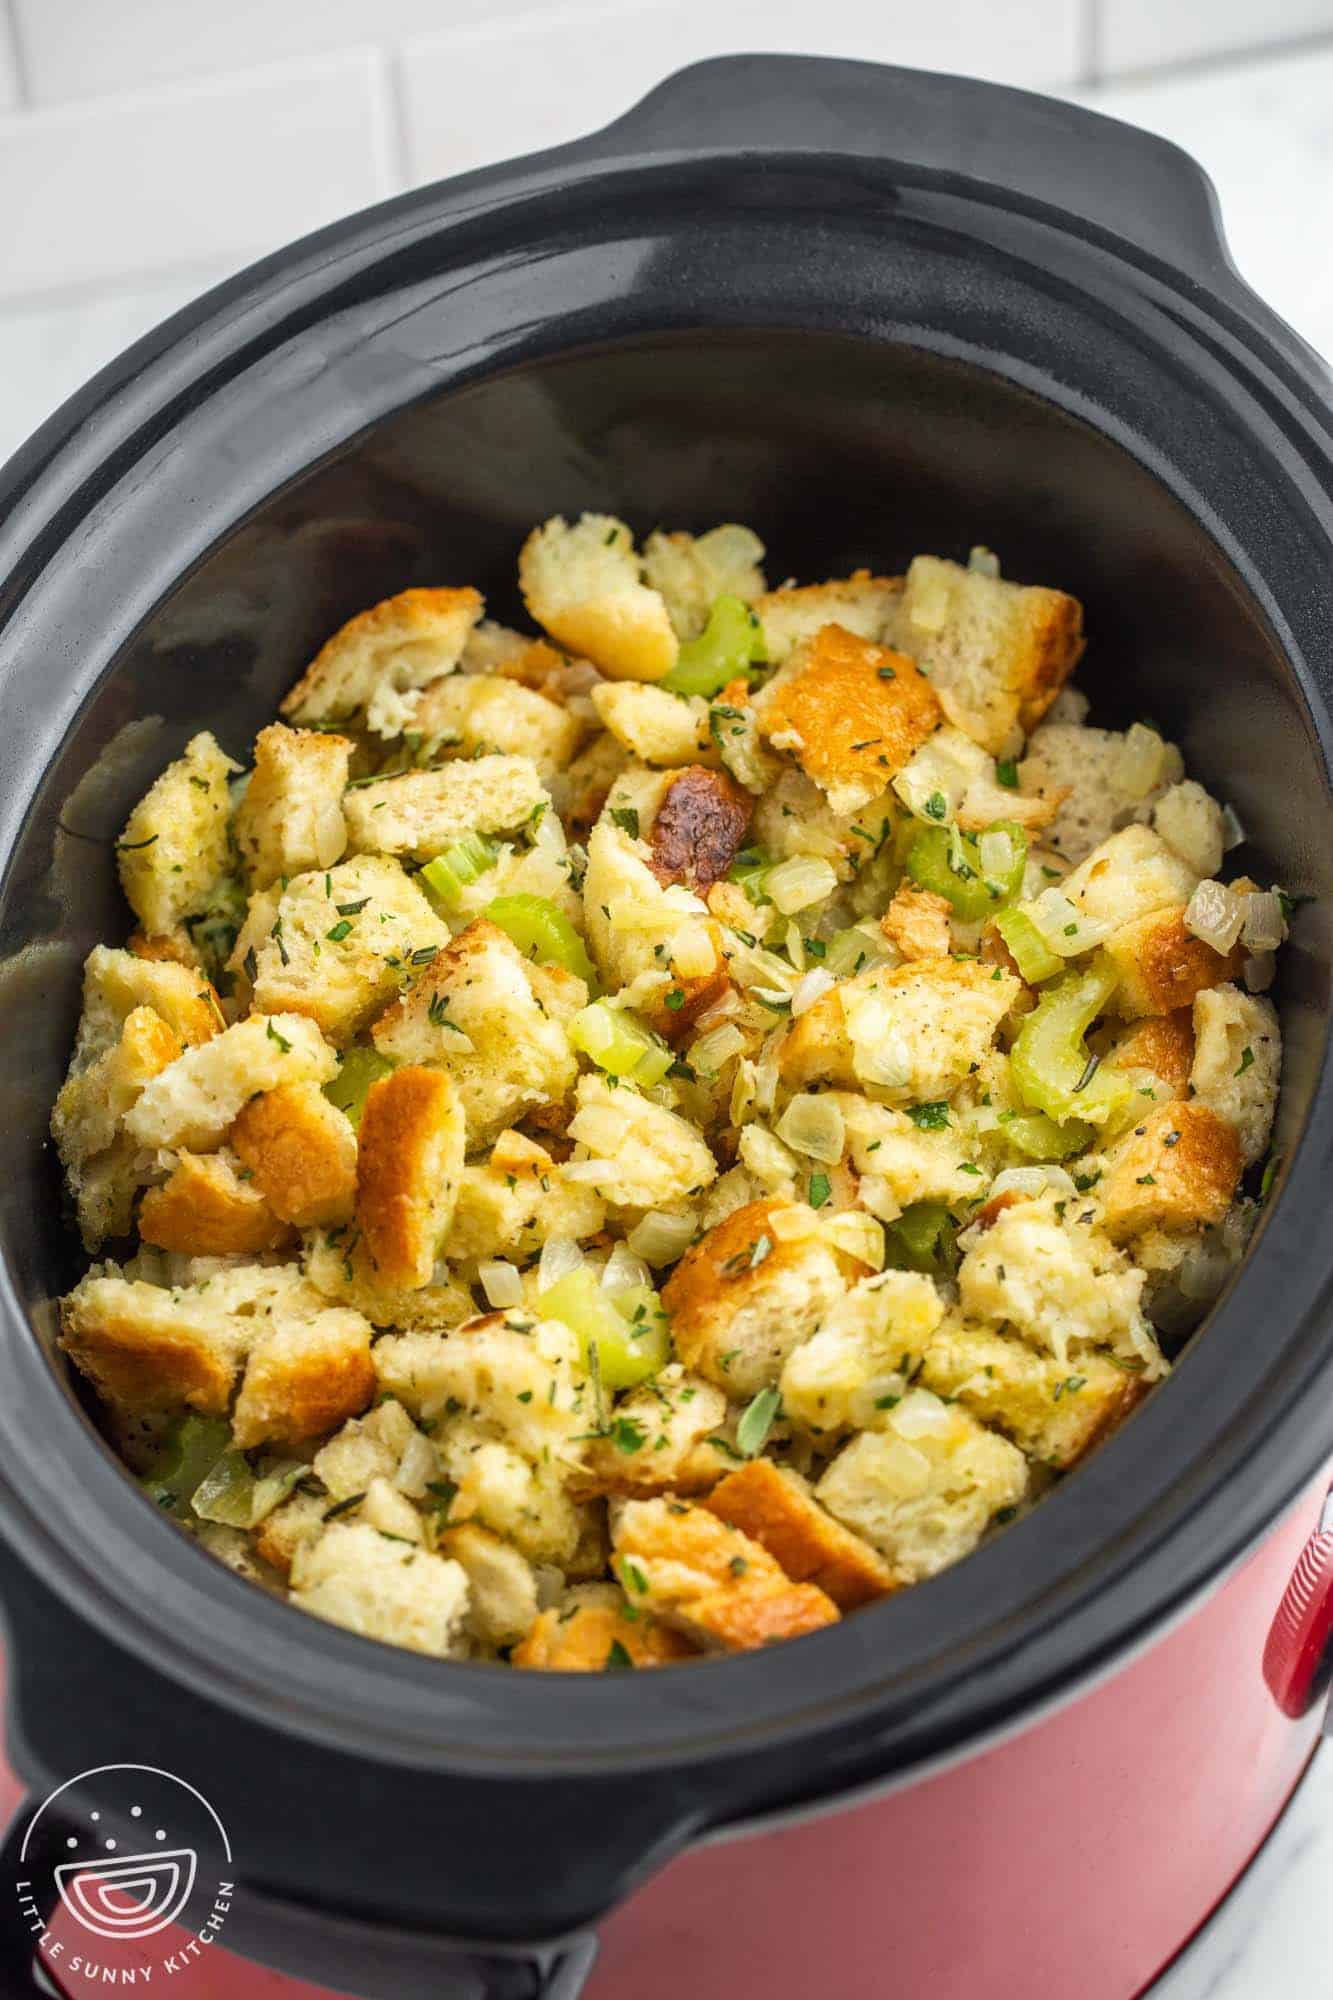 Herby stuffing in the Slow cooker